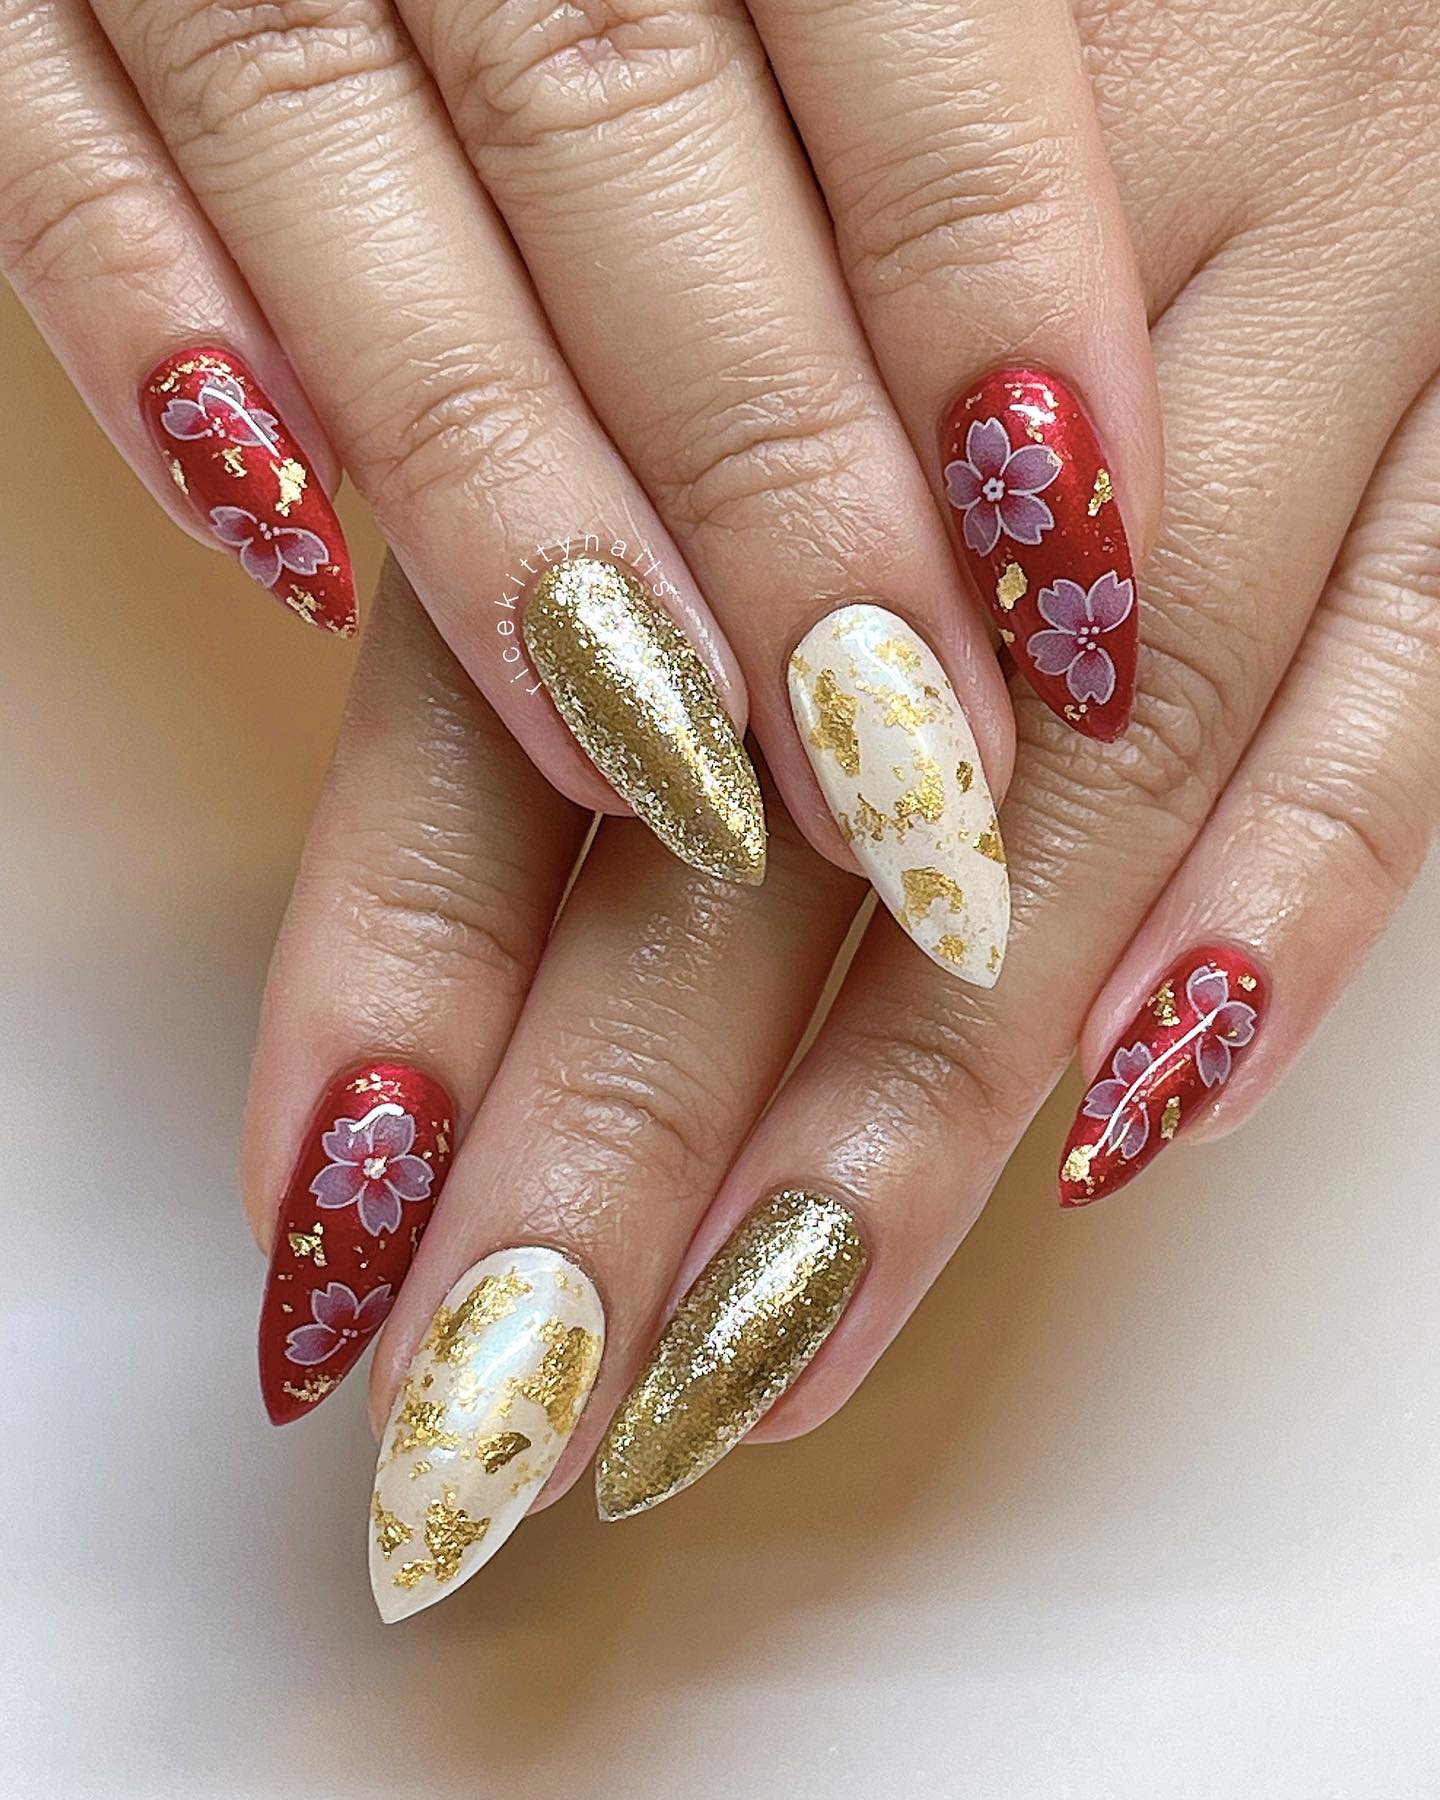 Red White and Gold Nails